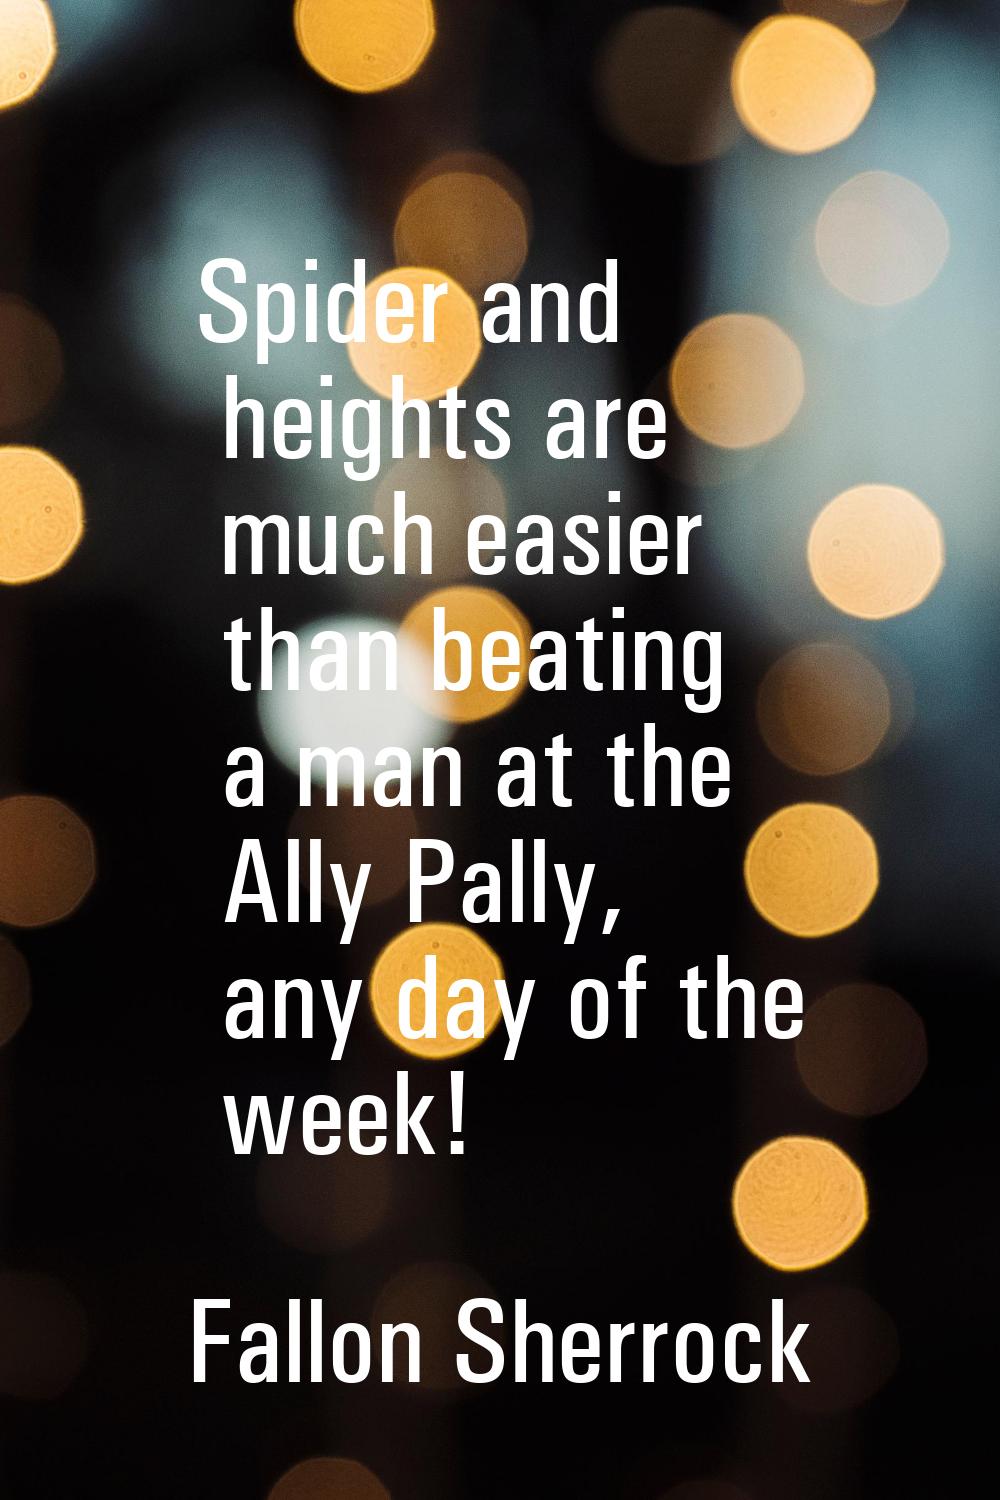 Spider and heights are much easier than beating a man at the Ally Pally, any day of the week!